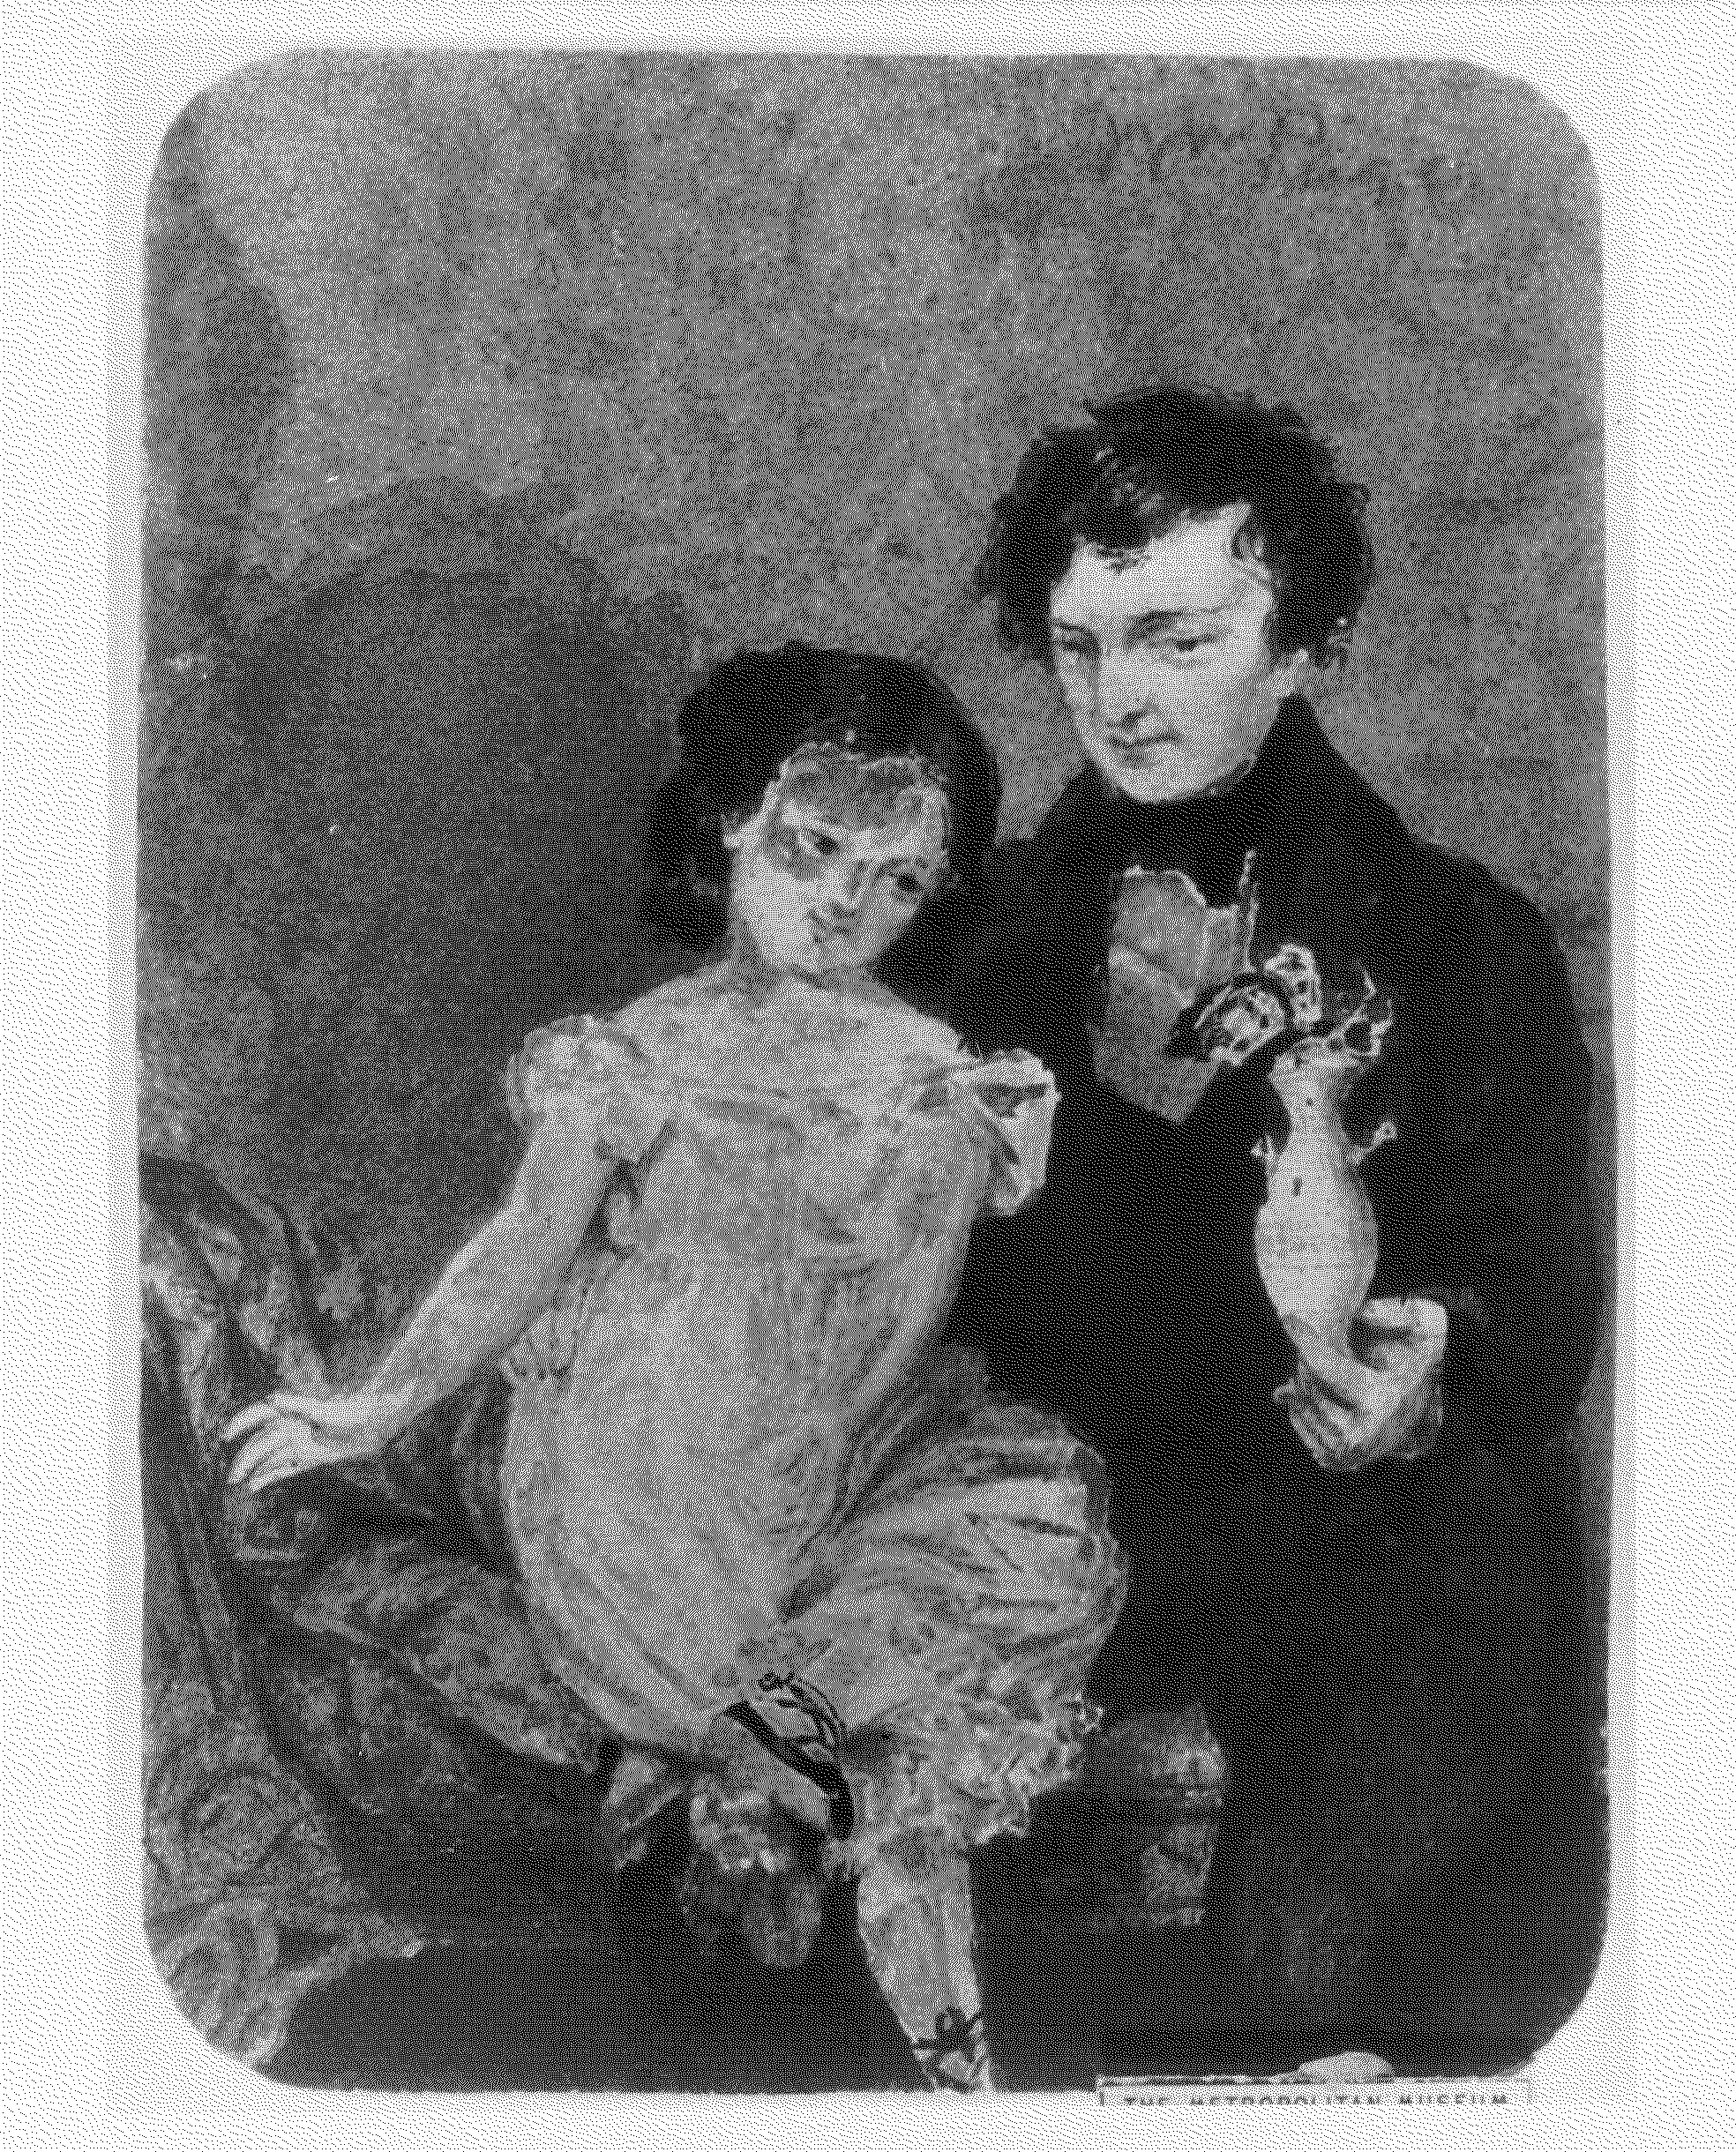 Man and Child from McGuire Scrapbook by William Page